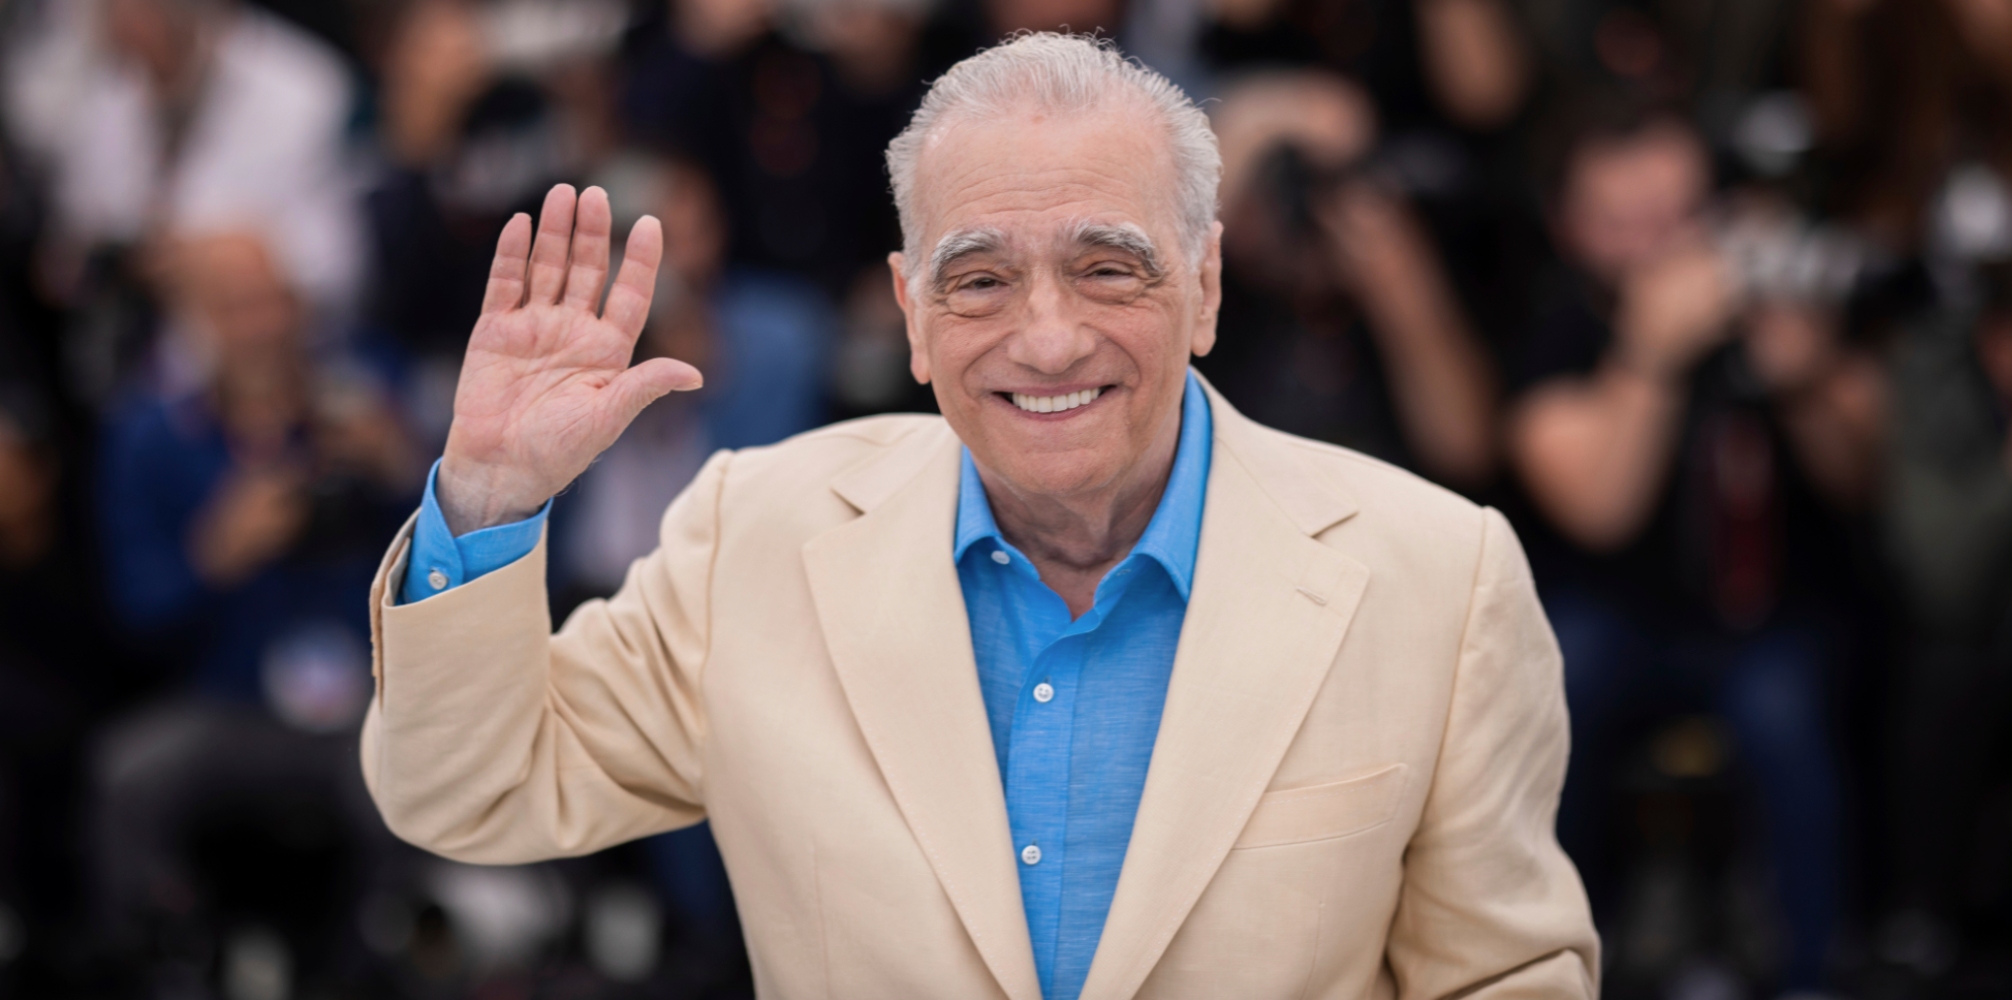 Martin Scorsese Is “About to Start Making” a New Film Concerning Jesus